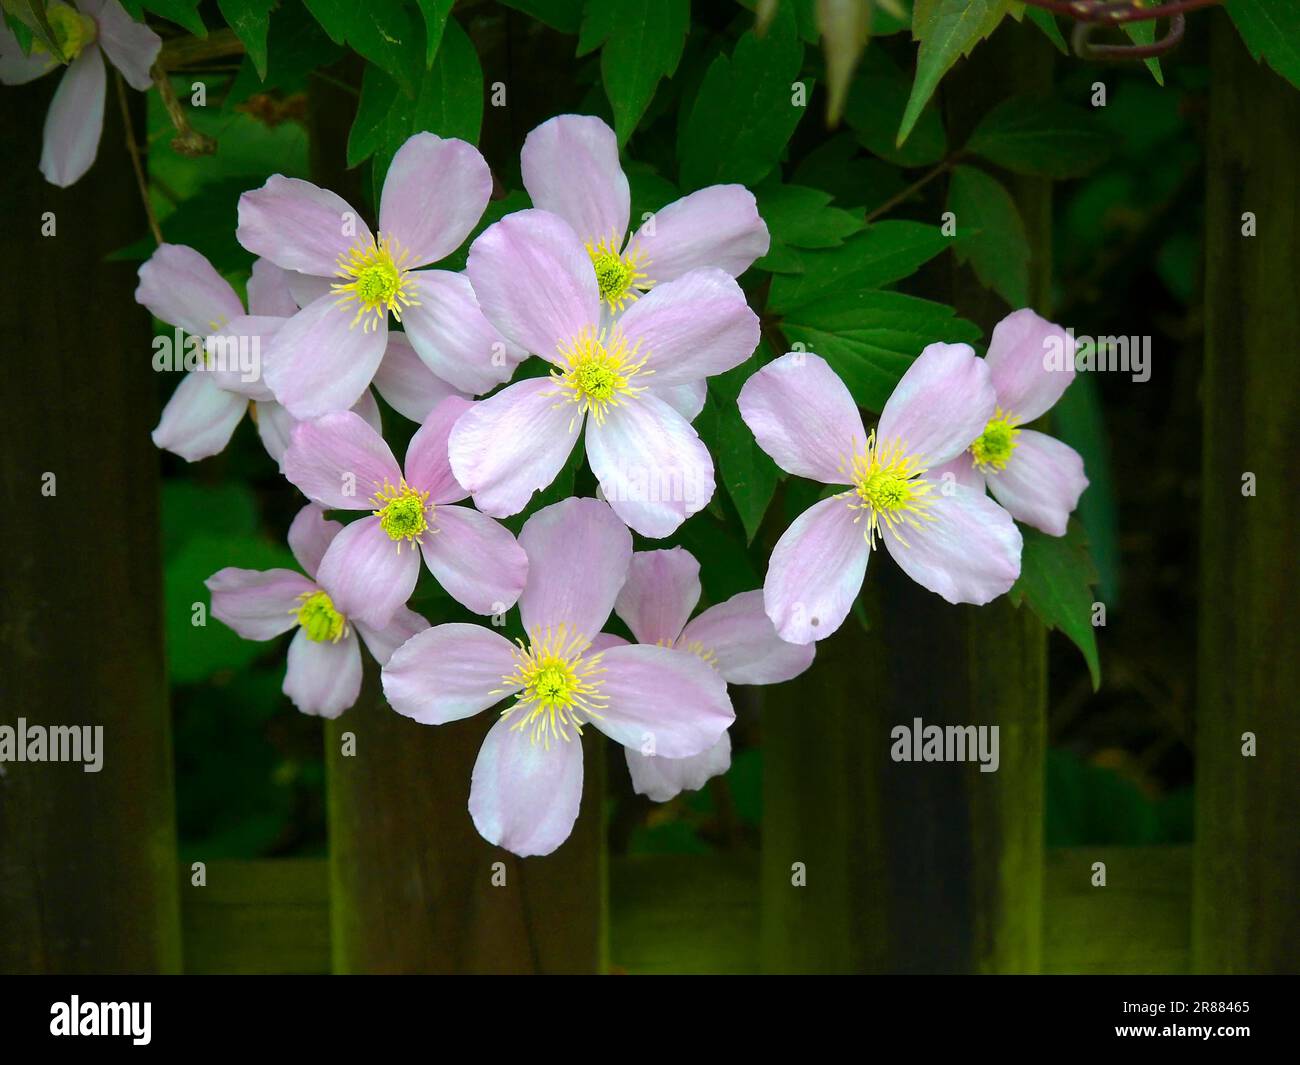 Clematises (Clematis) (clematis) flowering, by the garden fence, woodland vine, clematis Stock Photo